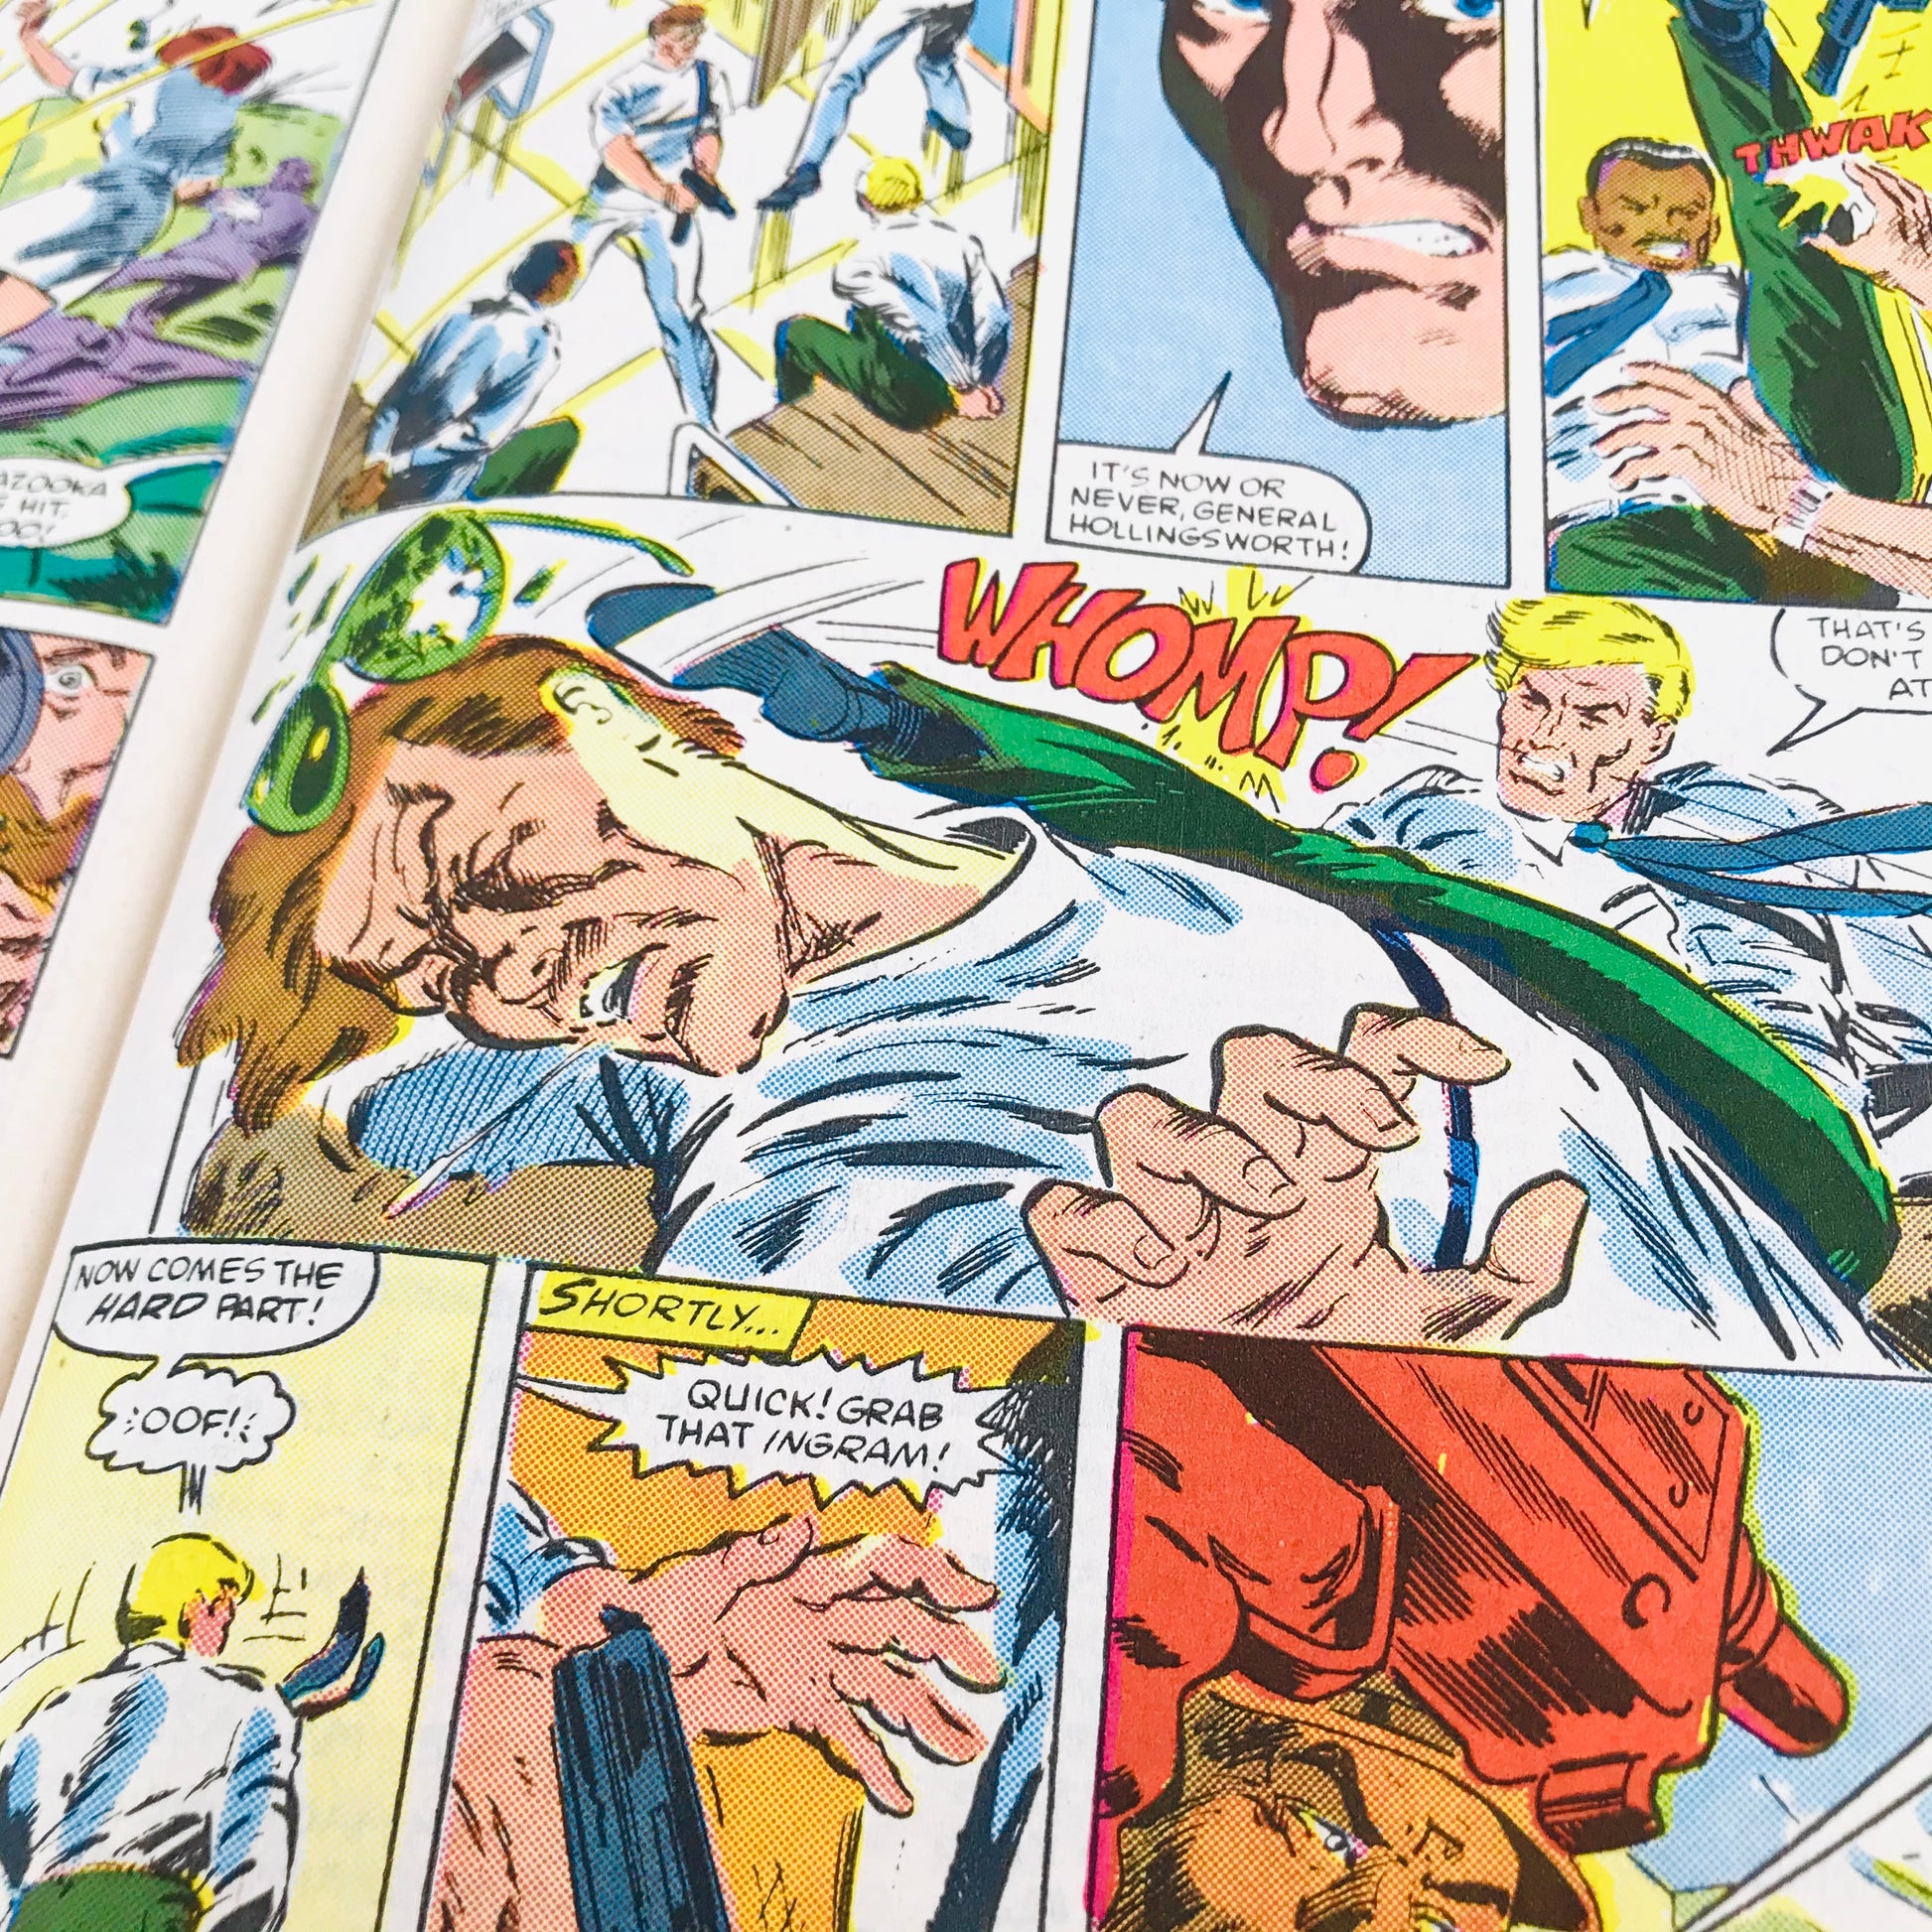 An action-packed sequence from a 1980s GI Joe comic book showing one character kicking the other with a sound effect spelled out as "Whomp!".